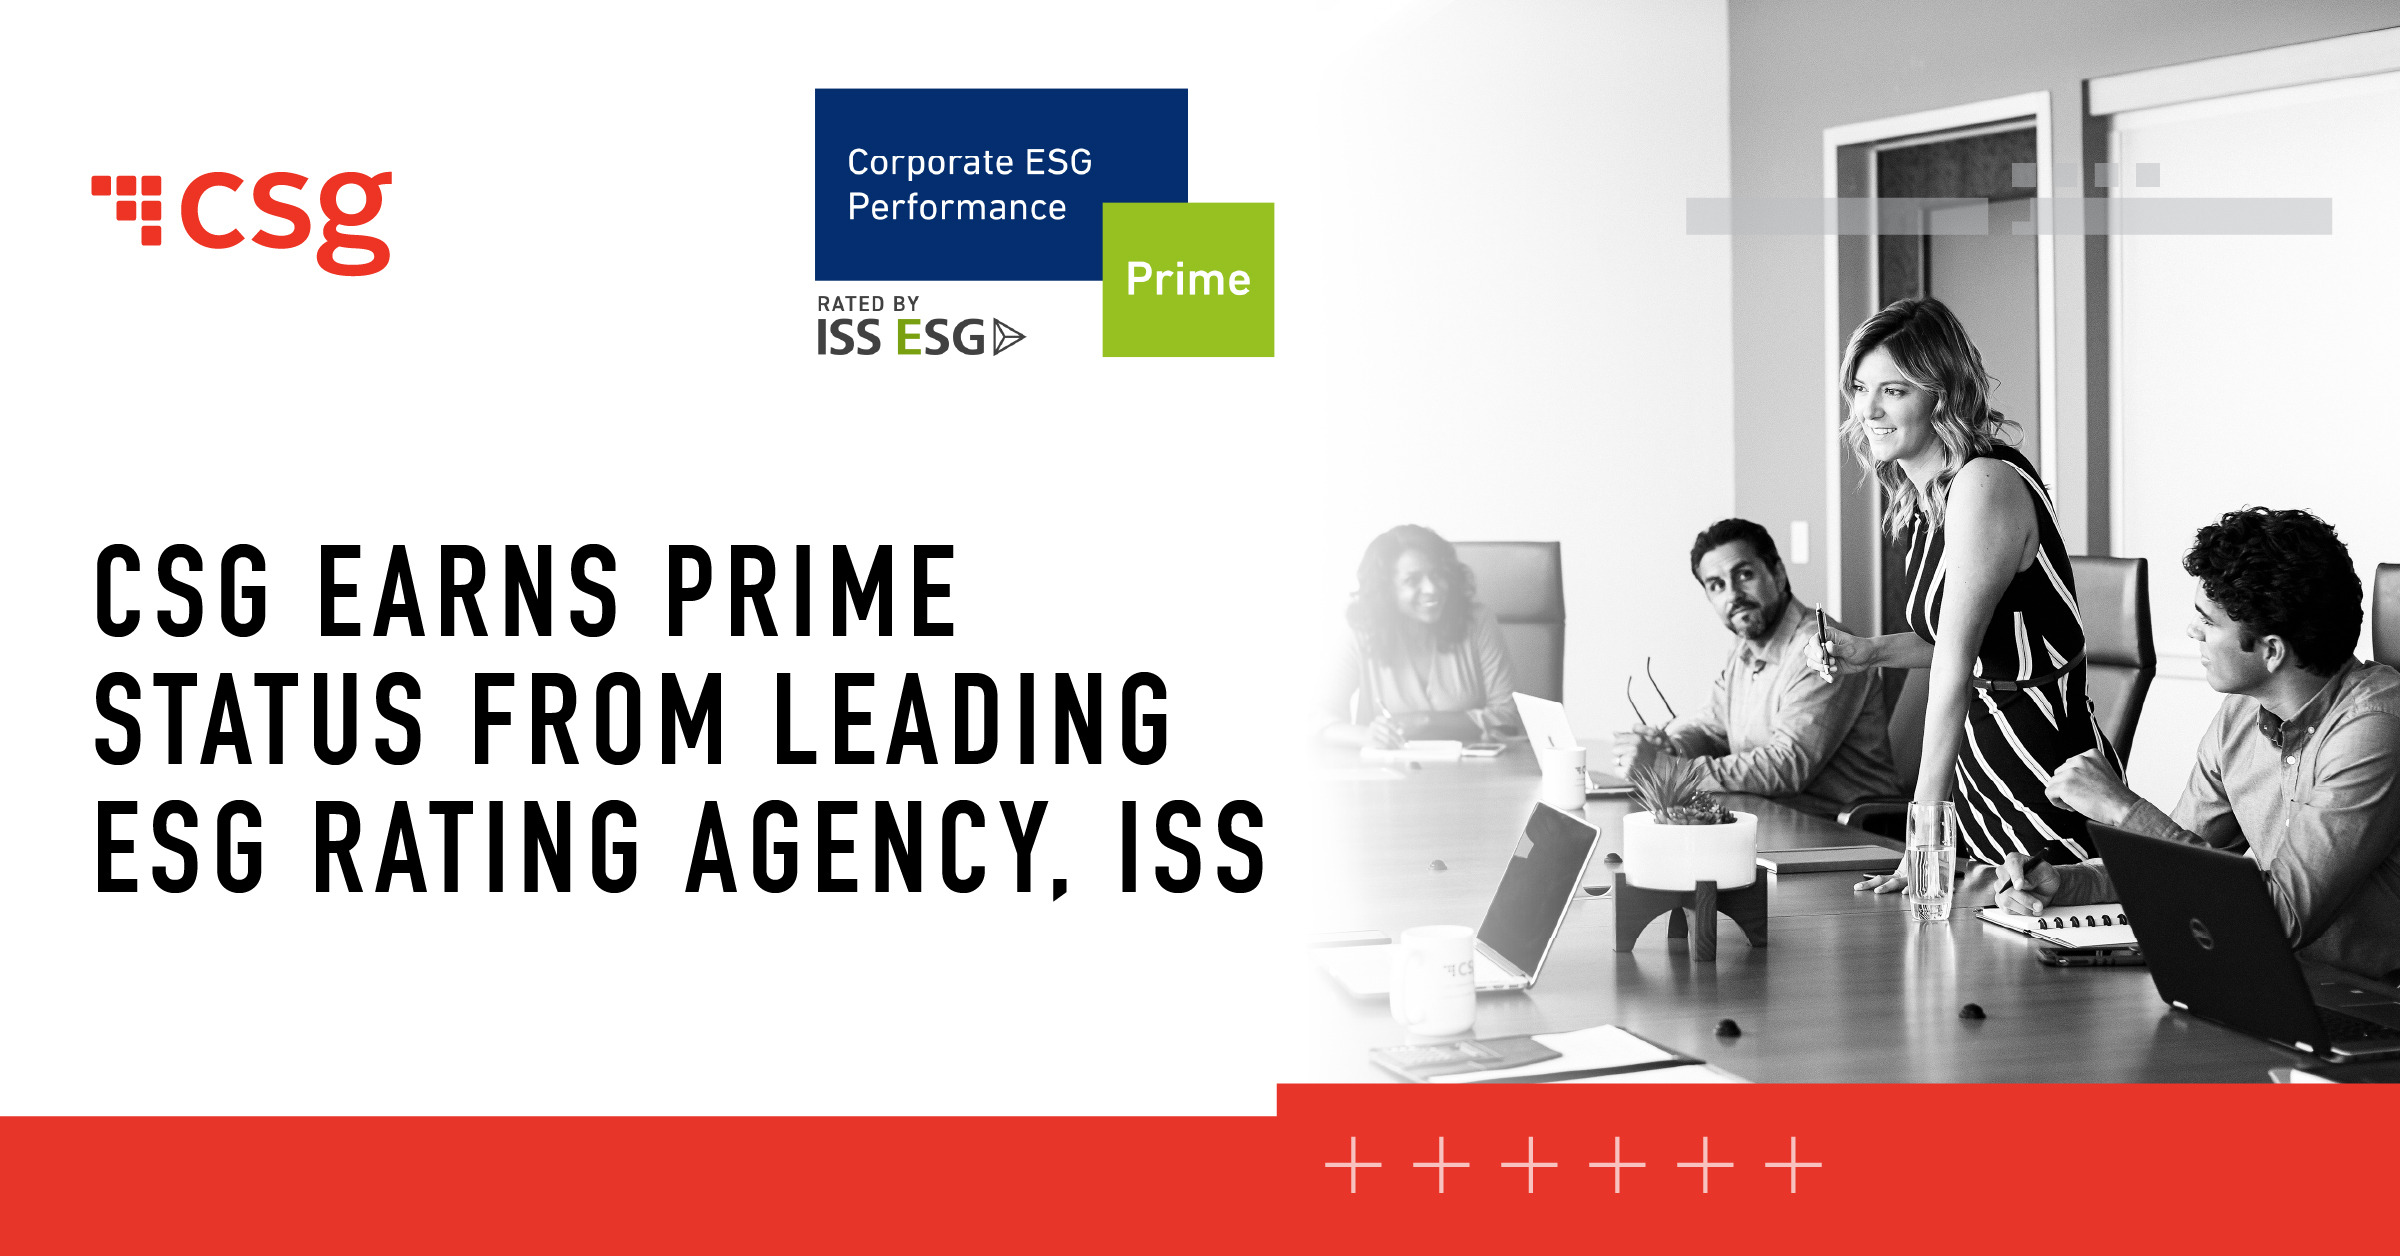 CSG Receives First “Prime” ISS ESG Corporate Rating in Company History